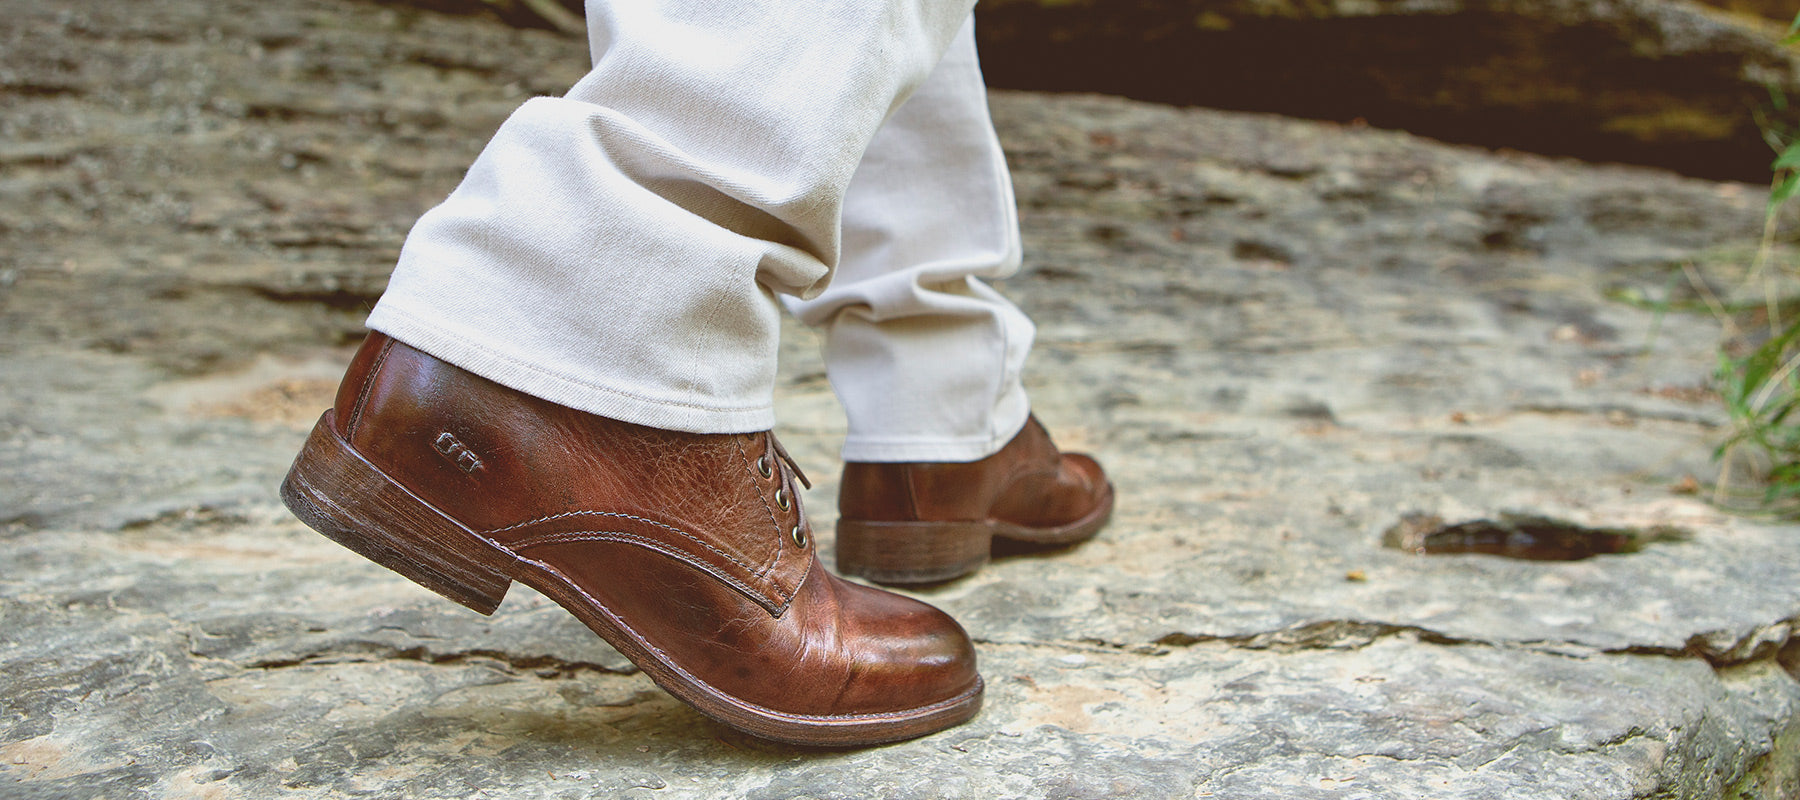 Close up of man walking in brown dress shoes with cream colored pants on rock ledge.